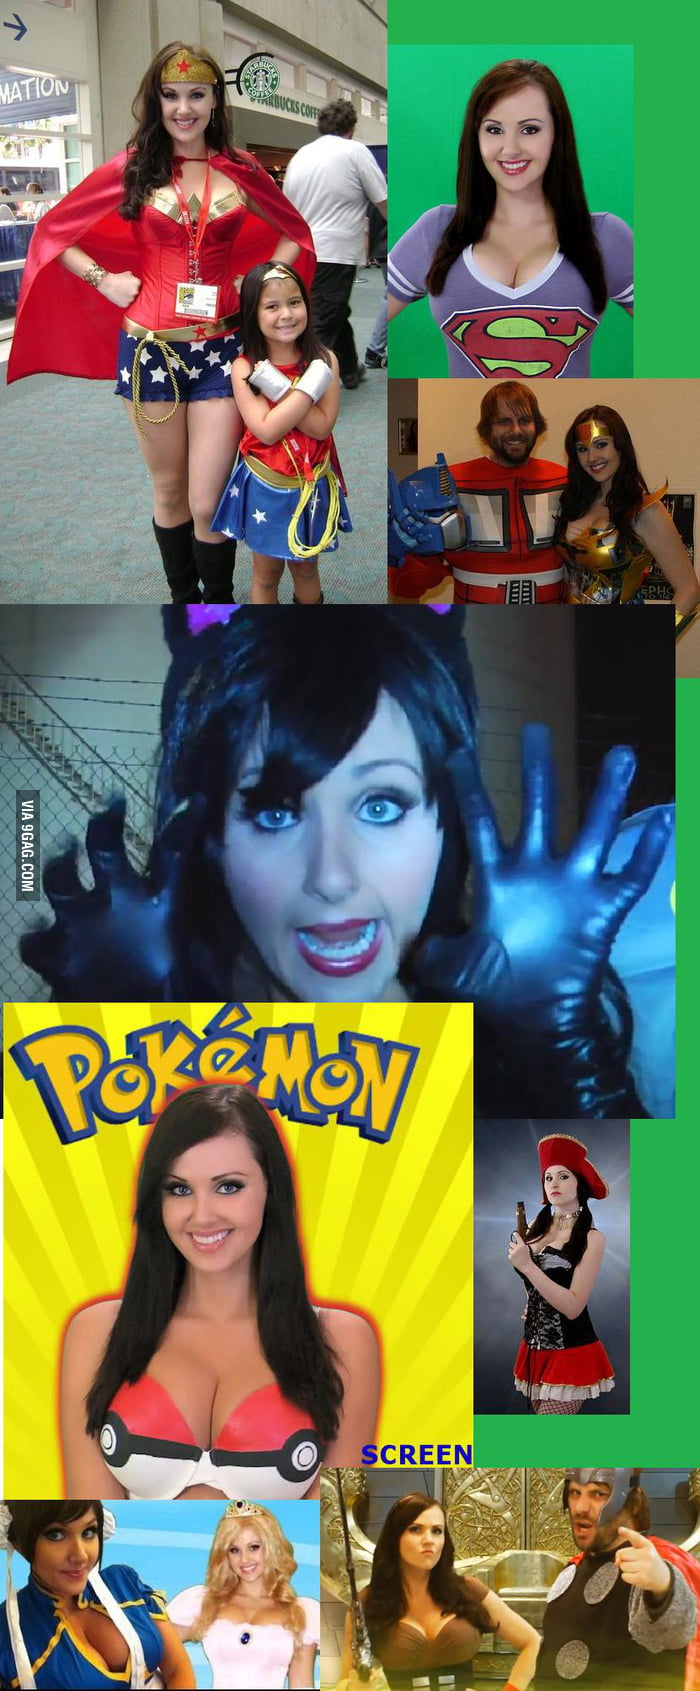 Angie griffin cosplaying - 9GAG